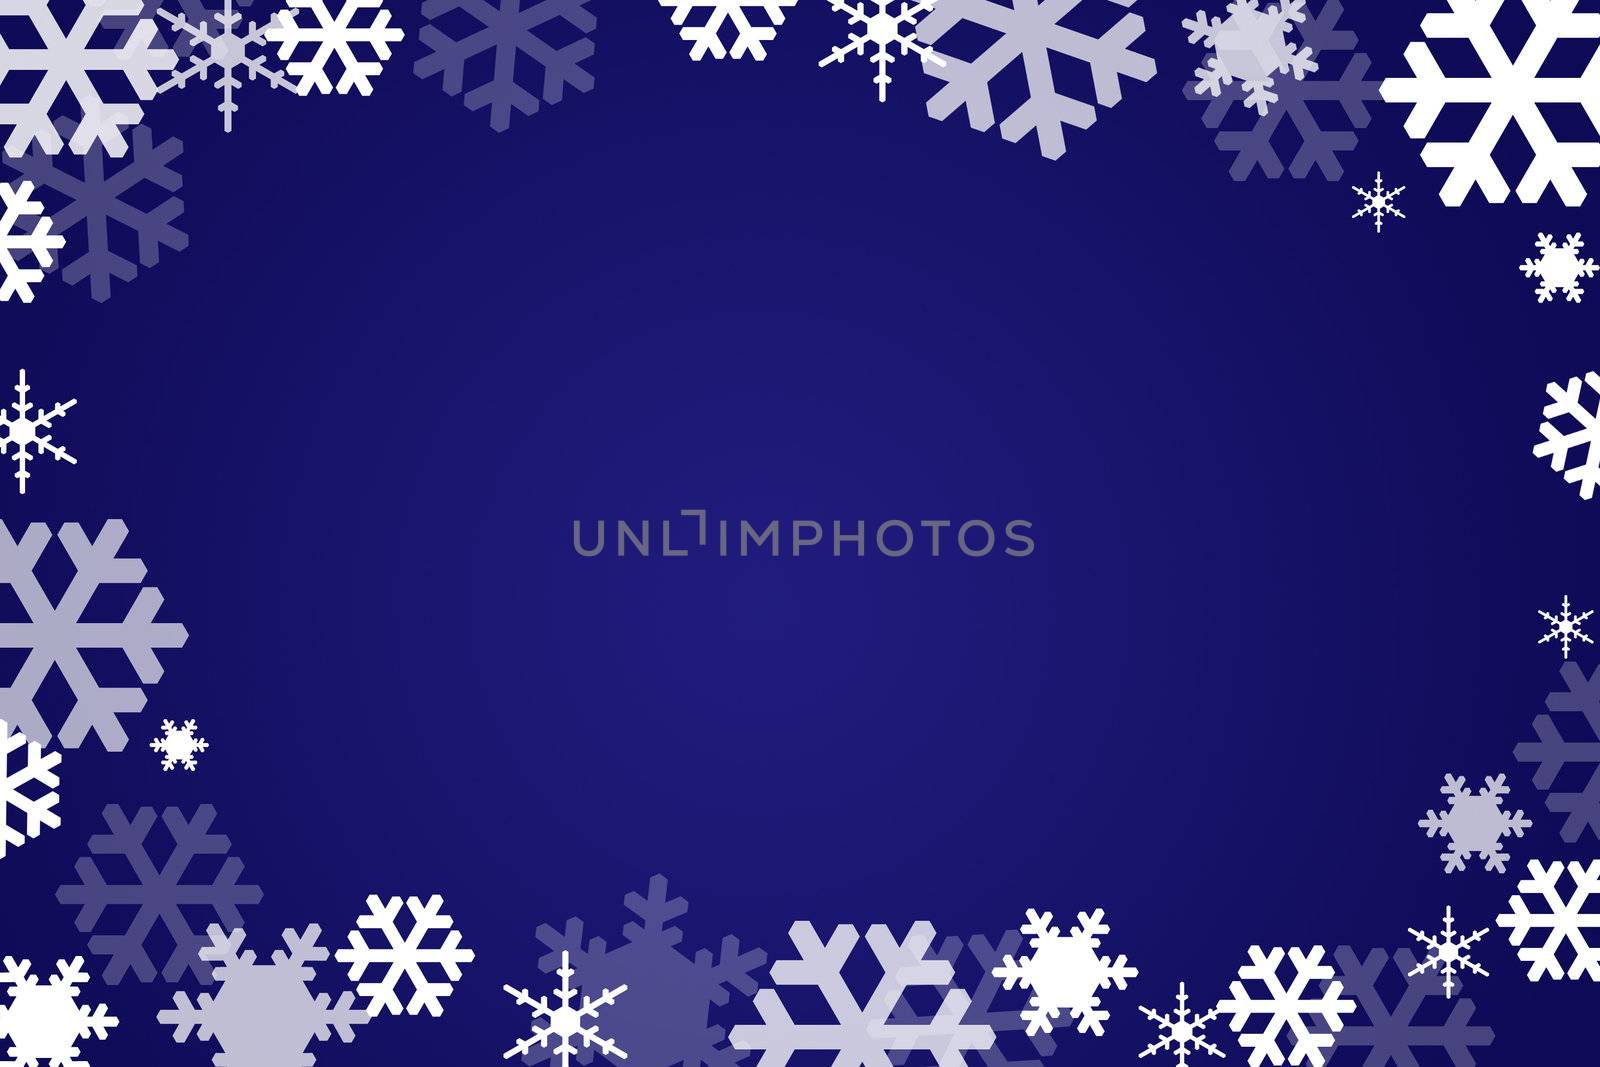 Snow flakes background by orson